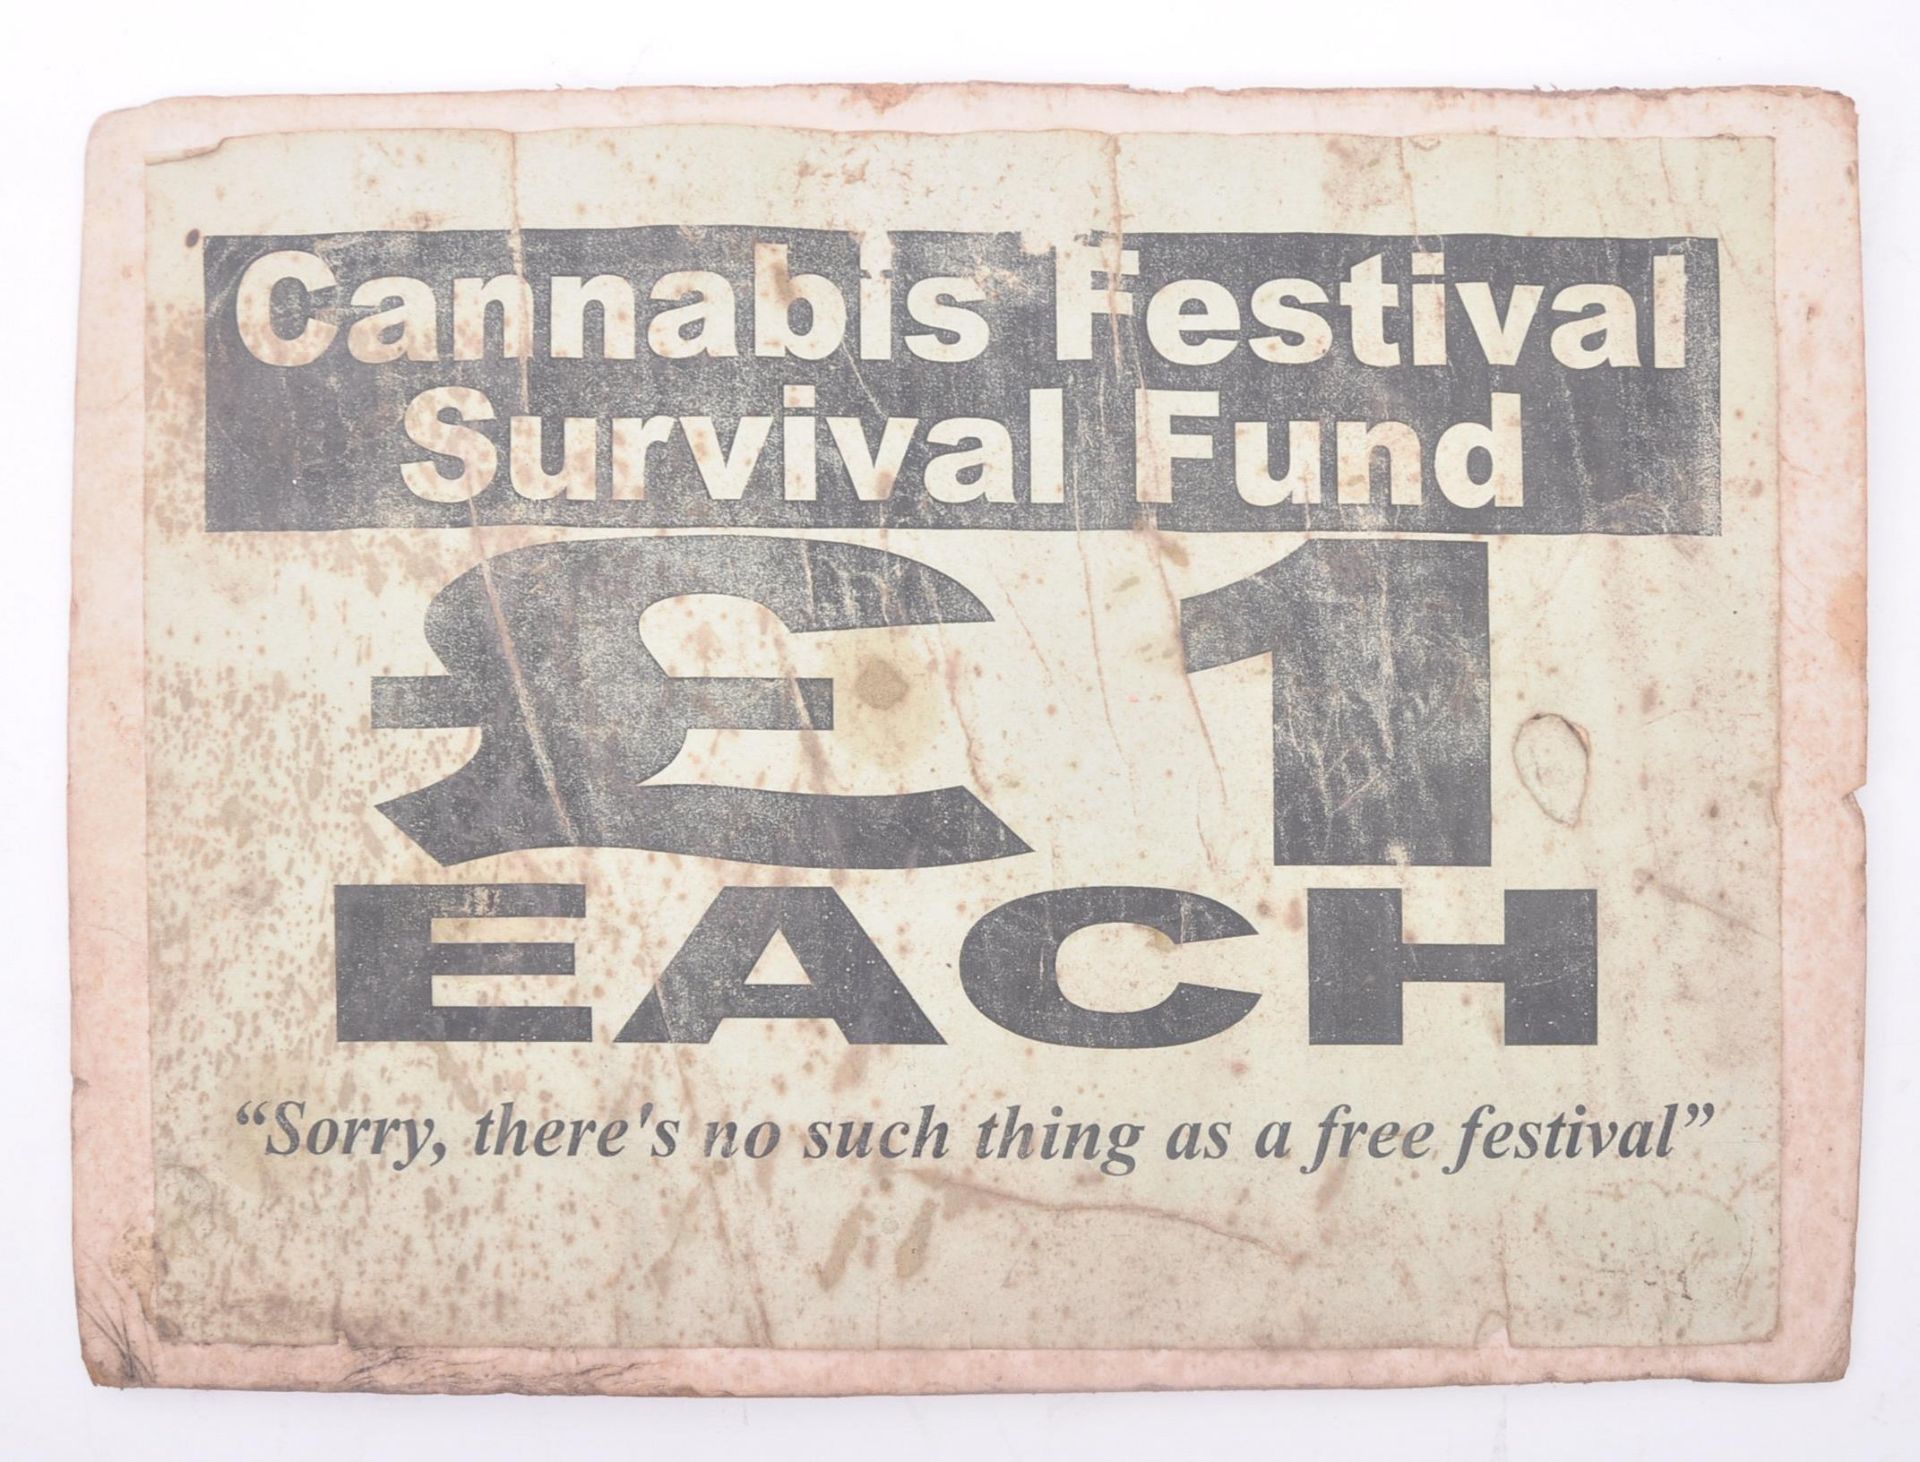 2001 CANNABIS FESTIVAL SURVIVAL FUND POSTER - Image 2 of 5